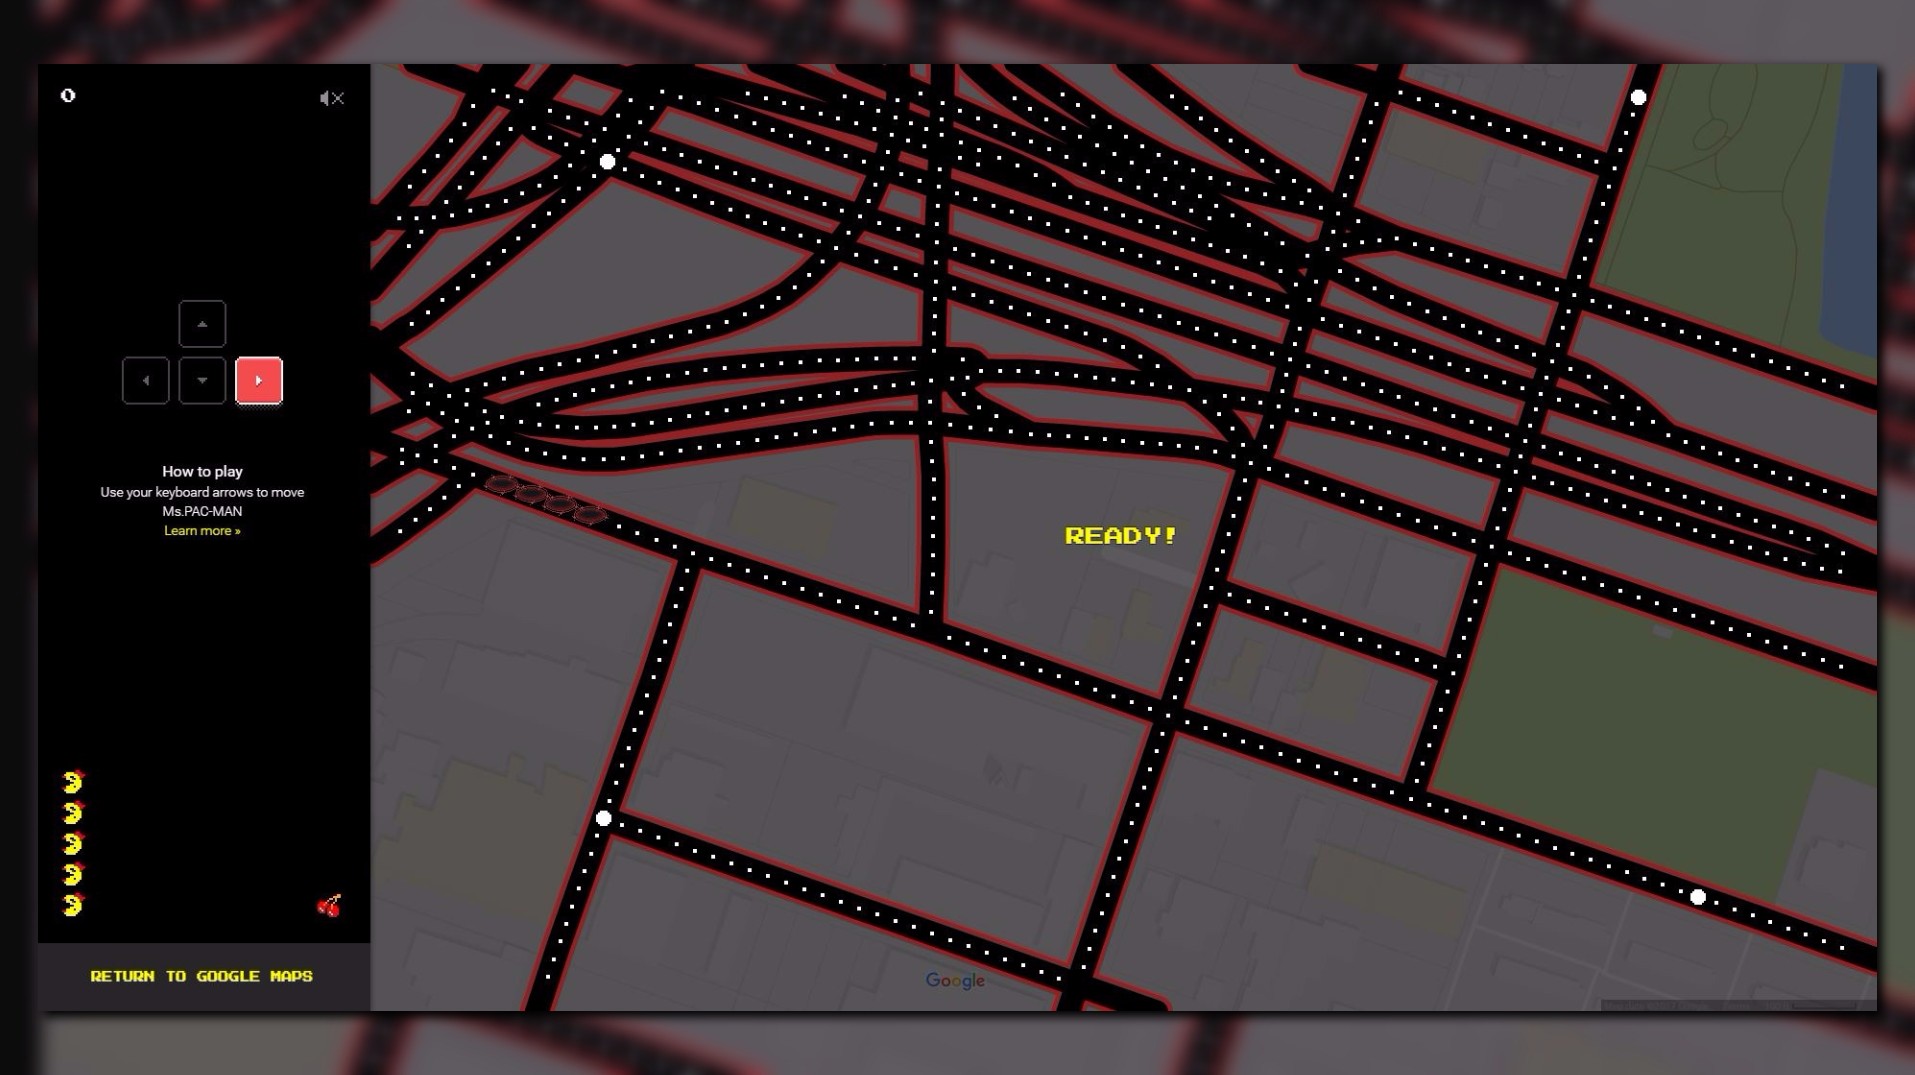 Play PAC-MAN on Google Maps view of Seattle